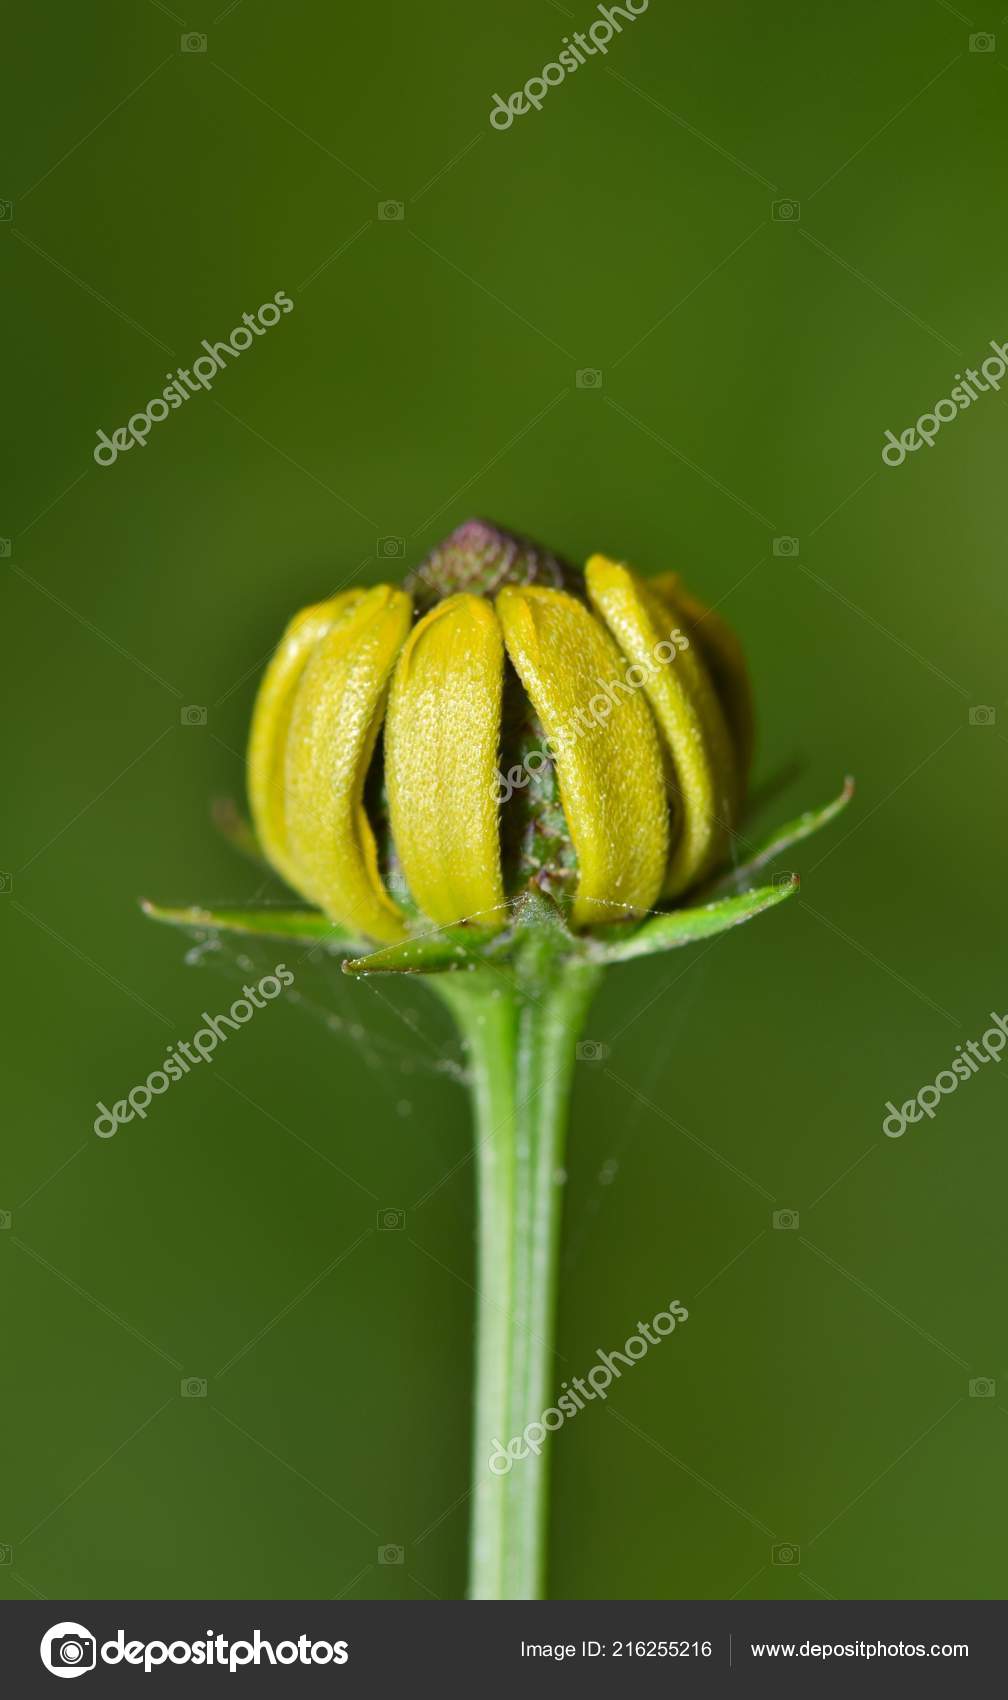 Small Coneflower Bud Open Its Petals Come Full Bloom Green Stock Photo C Stroppy1 216255216